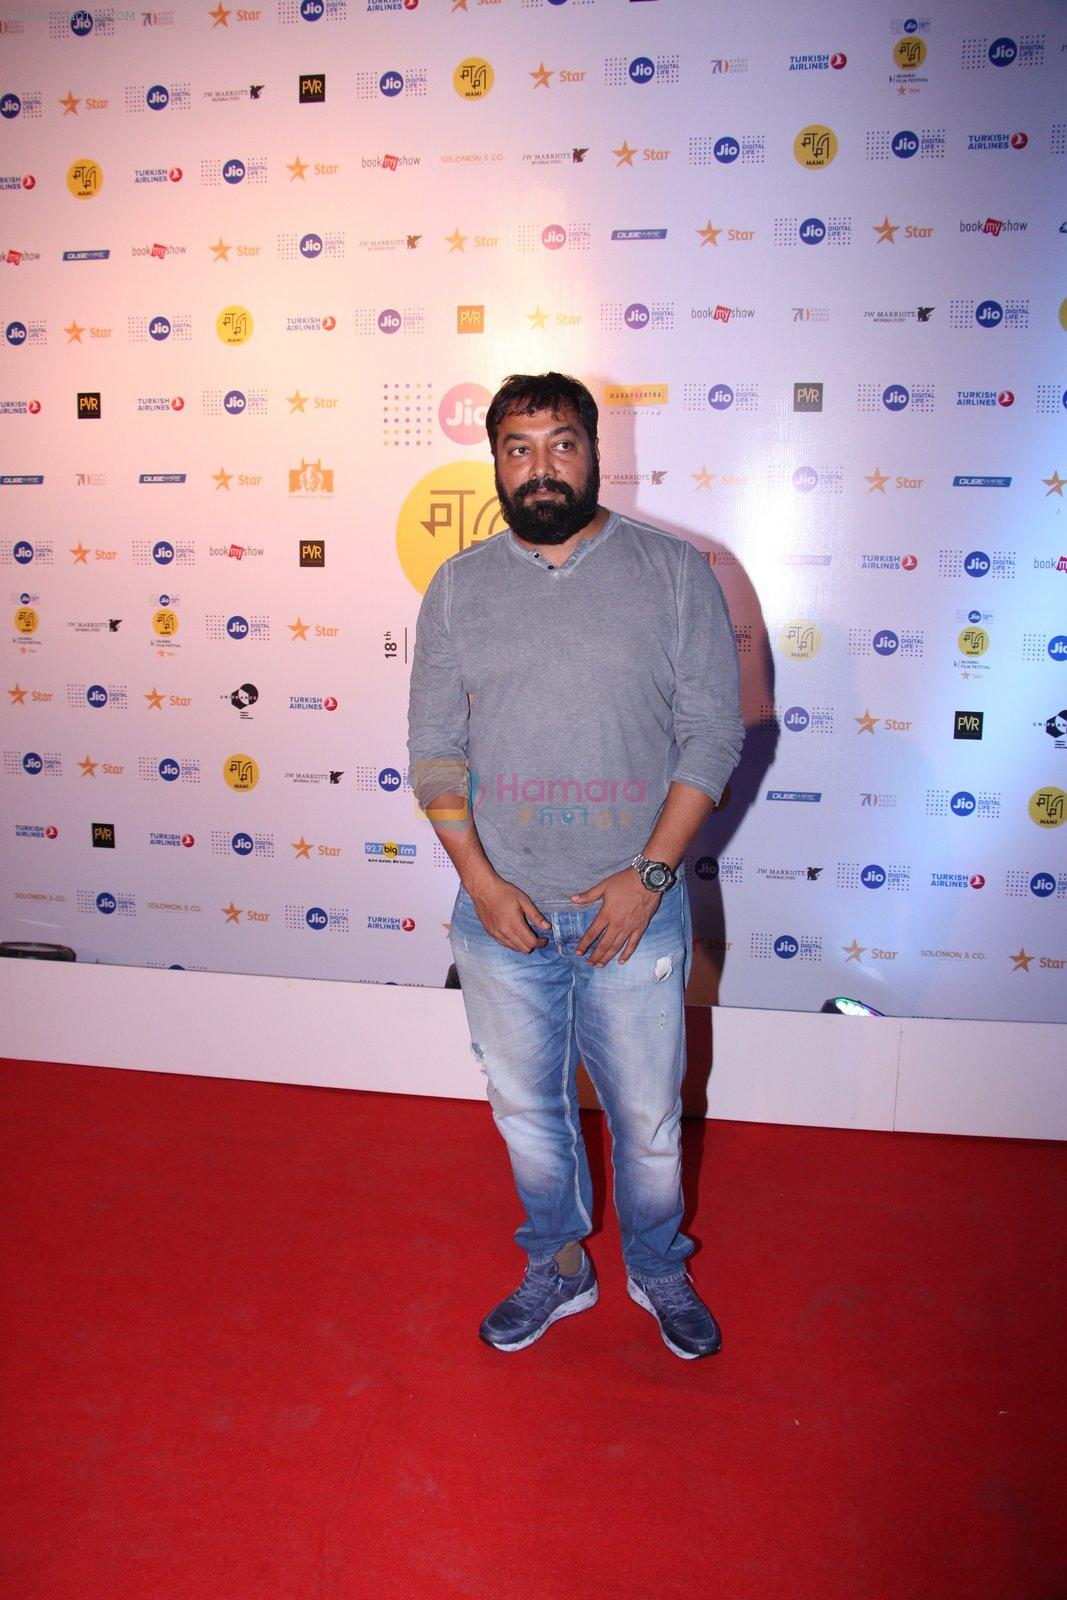 Anurag Kashyap at closing ceremony of MAMI Film Festival 2016 on 27th Oct 2016